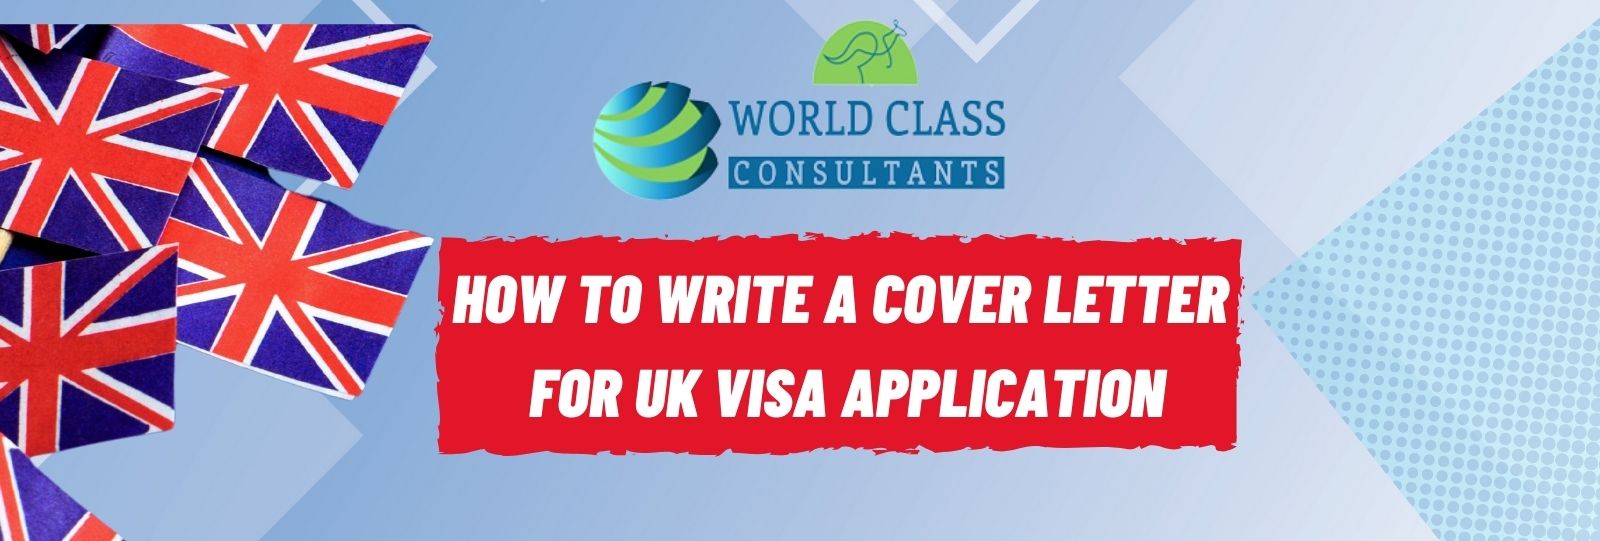 Boost your UK visa approval chances with a well-written cover letter